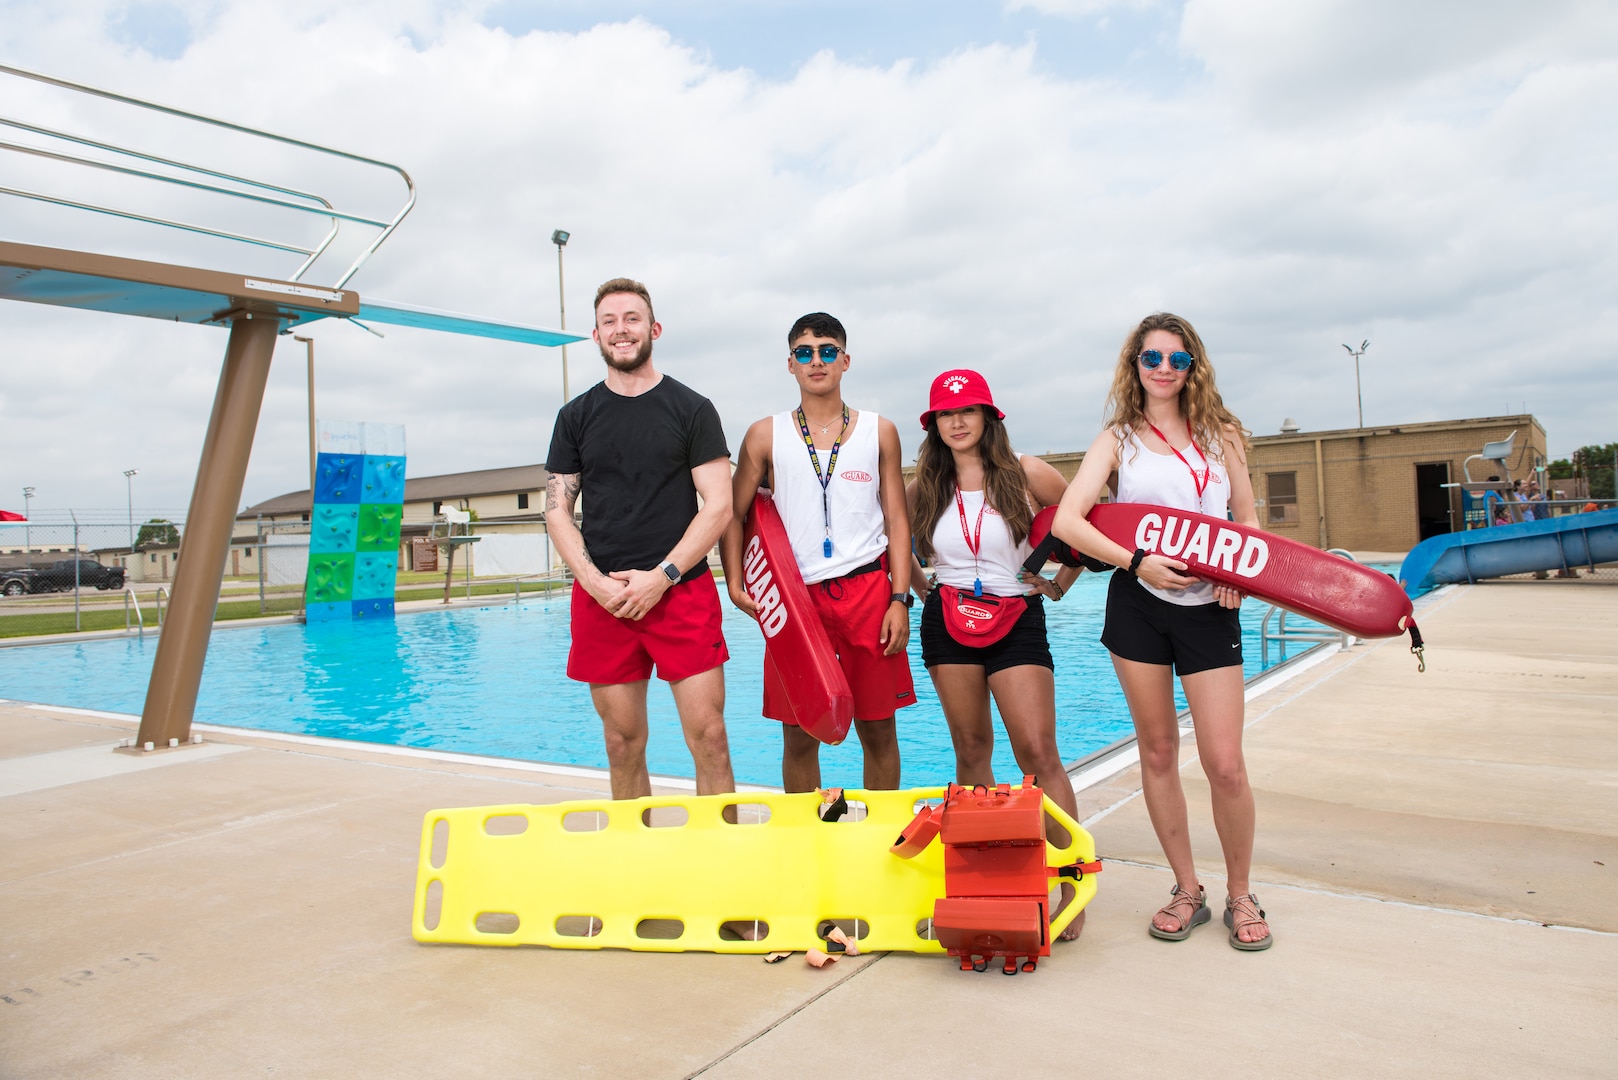 Bailey Parker, Eric Medelez, Silvia Garcia and Savannah Delange, 502nd Force Support Squadron lifeguards, pose for a photo at the Warhawk pool,June 21, 2019, at Joint Base San Antonio-Lackland, Texas.